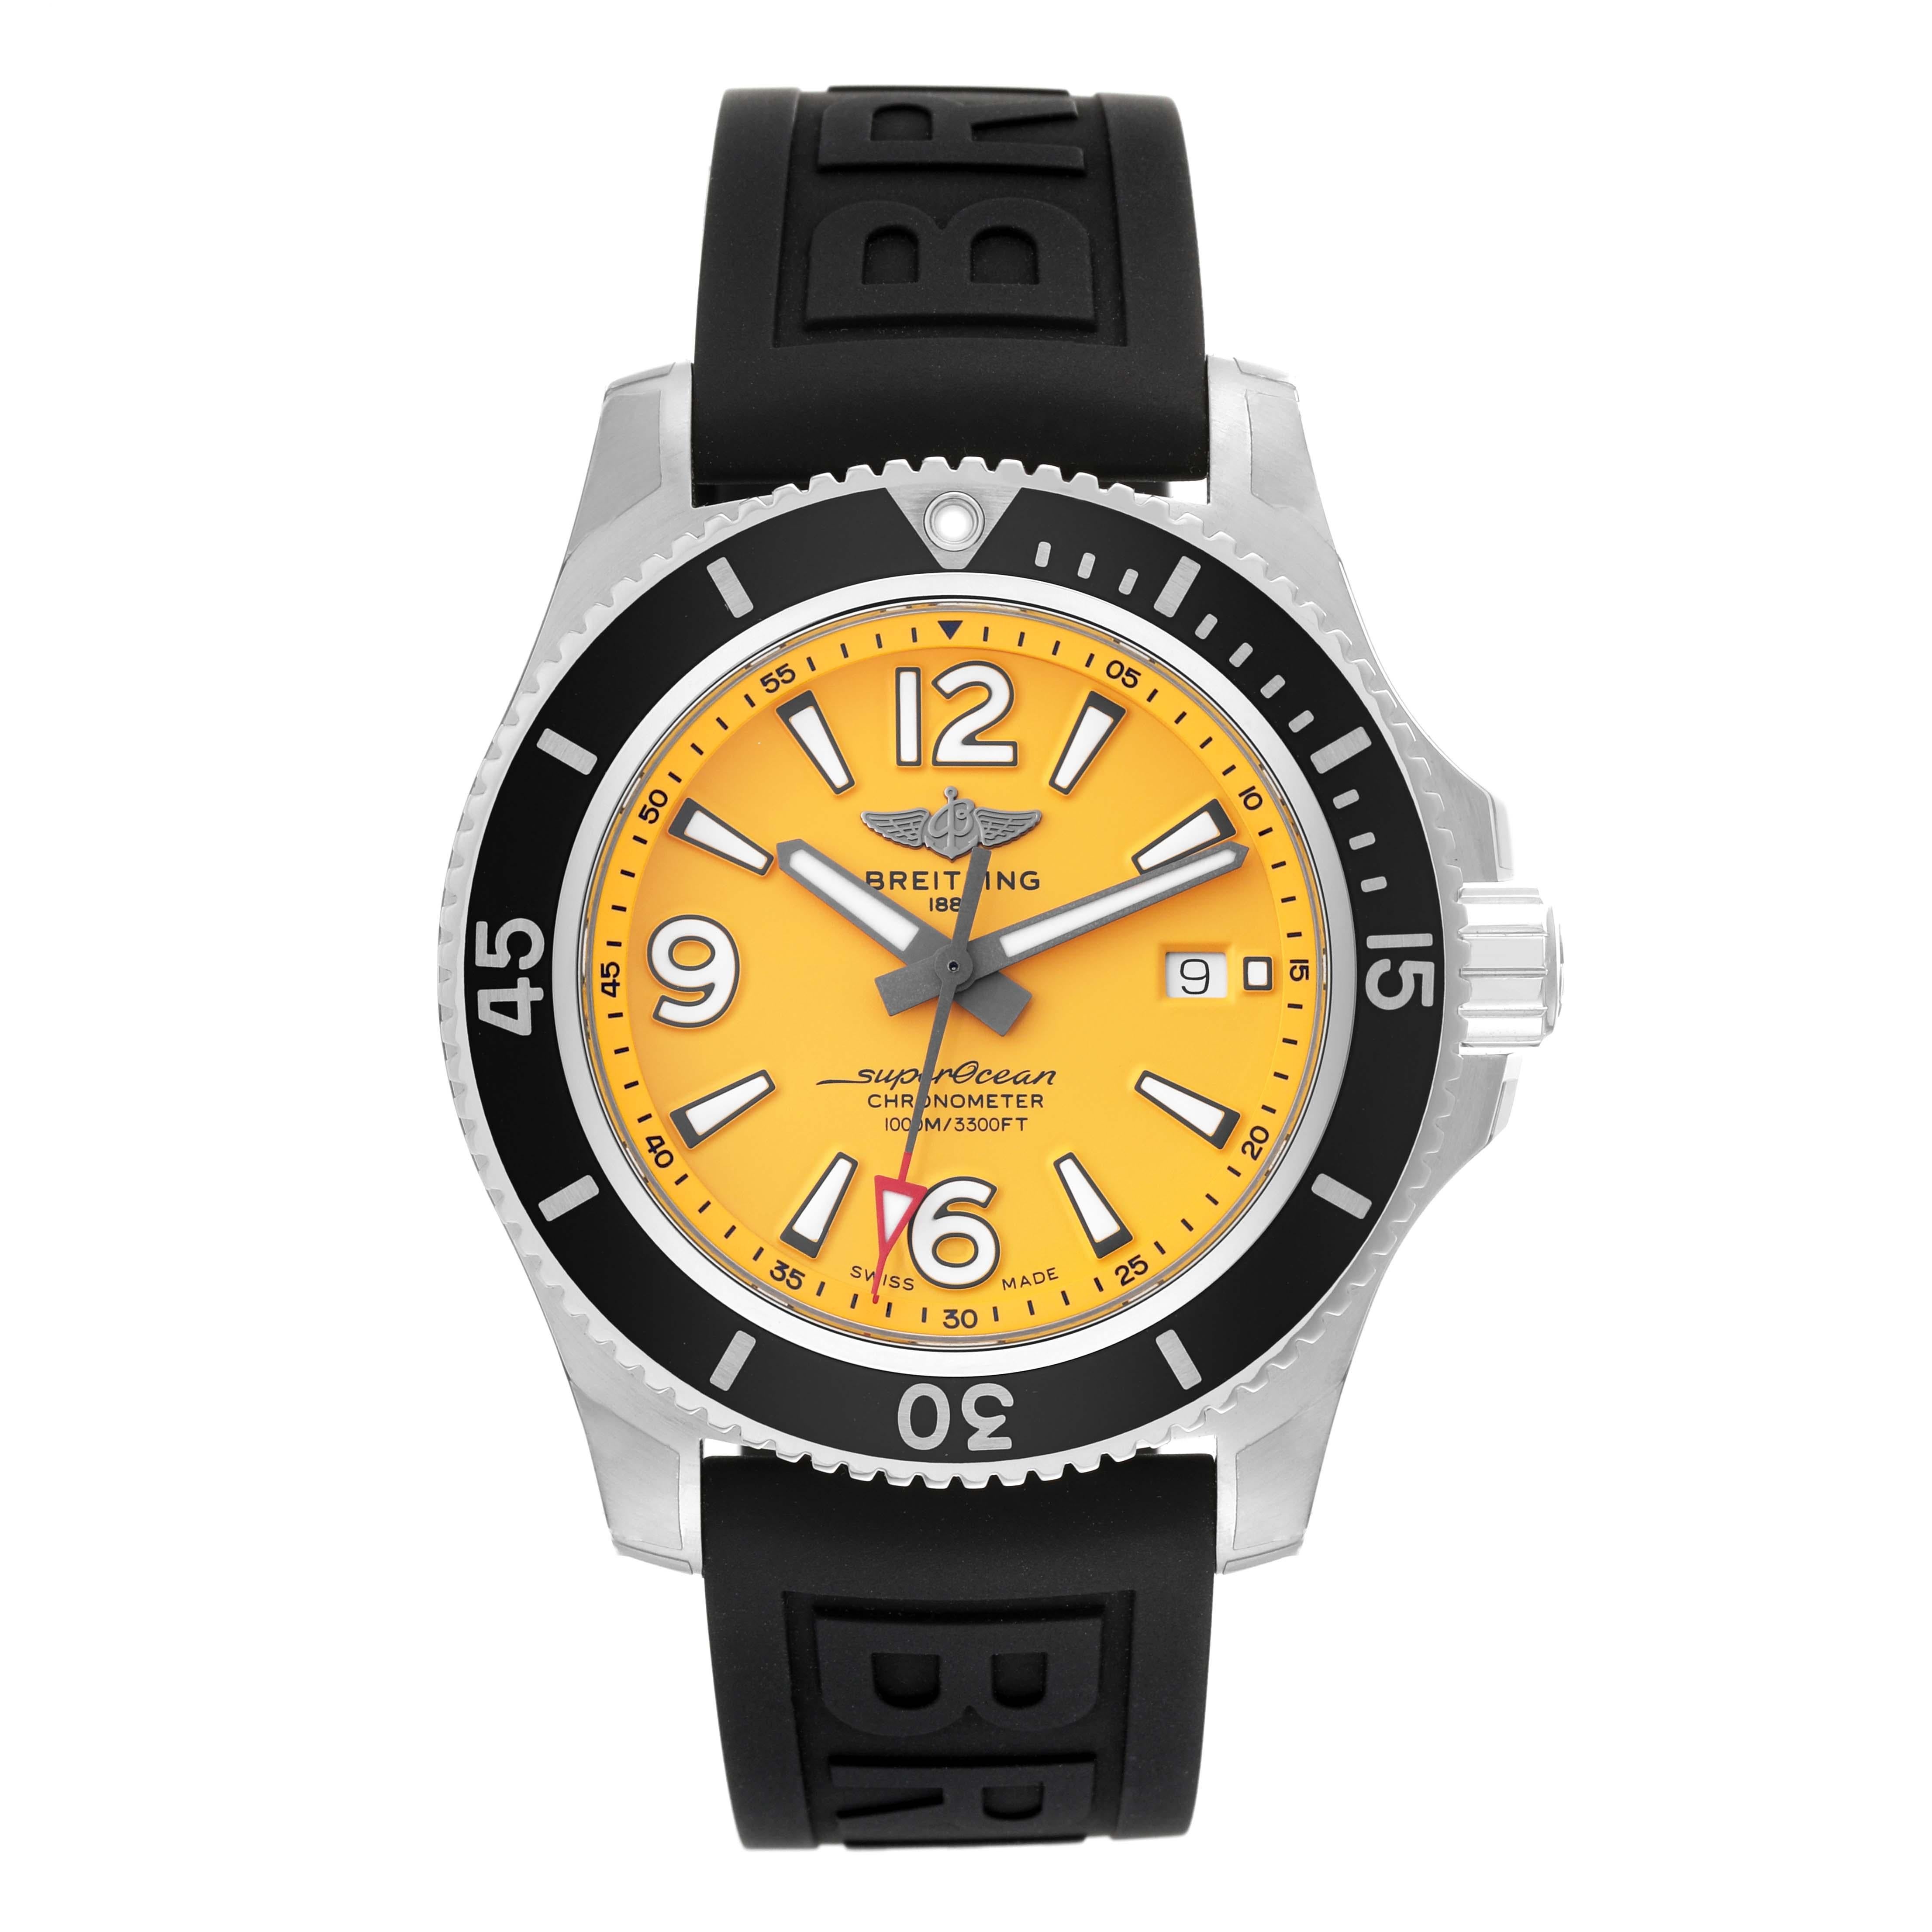 Breitling Superocean II Yellow Dial Steel Mens Watch A17367 Unworn. Automatic self-winding movement. Stainless steel case 44 mm in diameter. Stainless steel screwed-down crown and pushers. Black unidirectional rotating bezel. 0-60 elapsed-time.